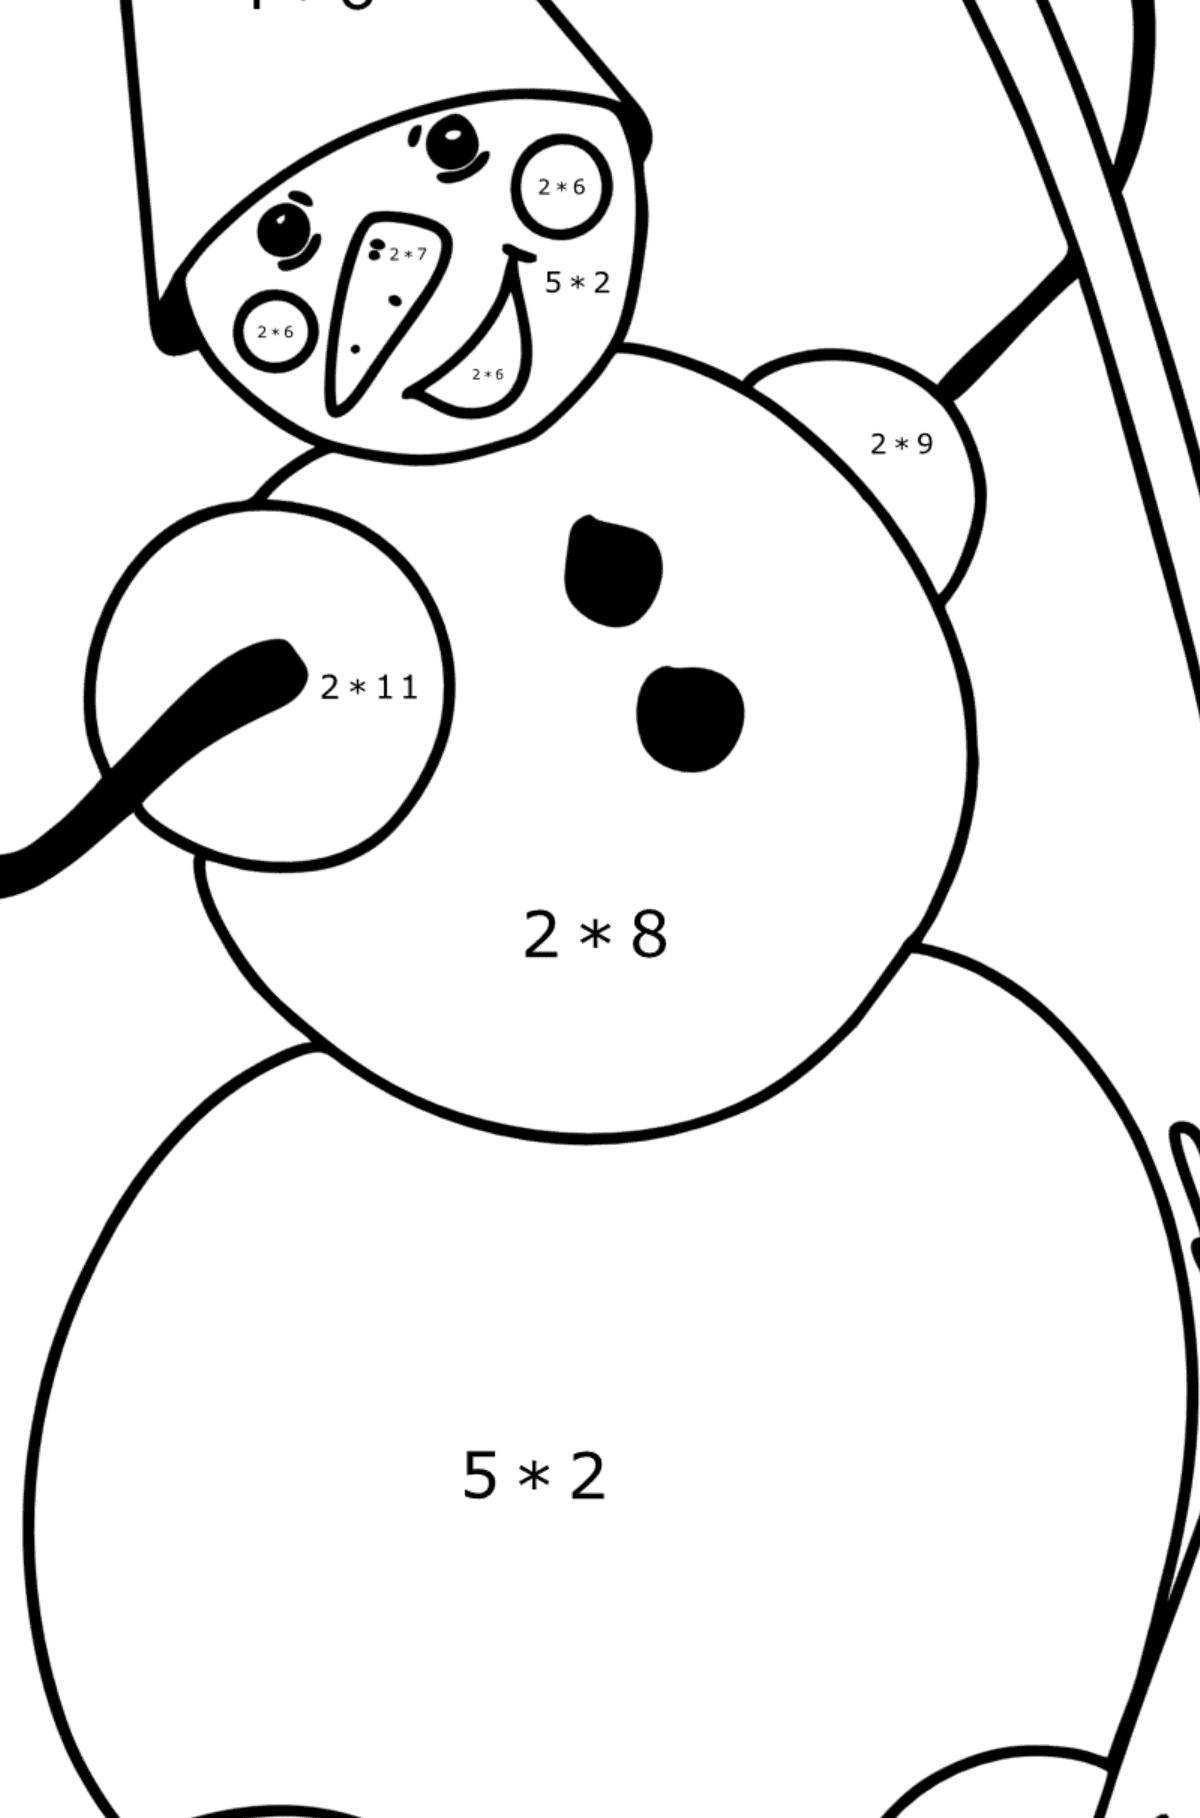 Playful snowman coloring by numbers